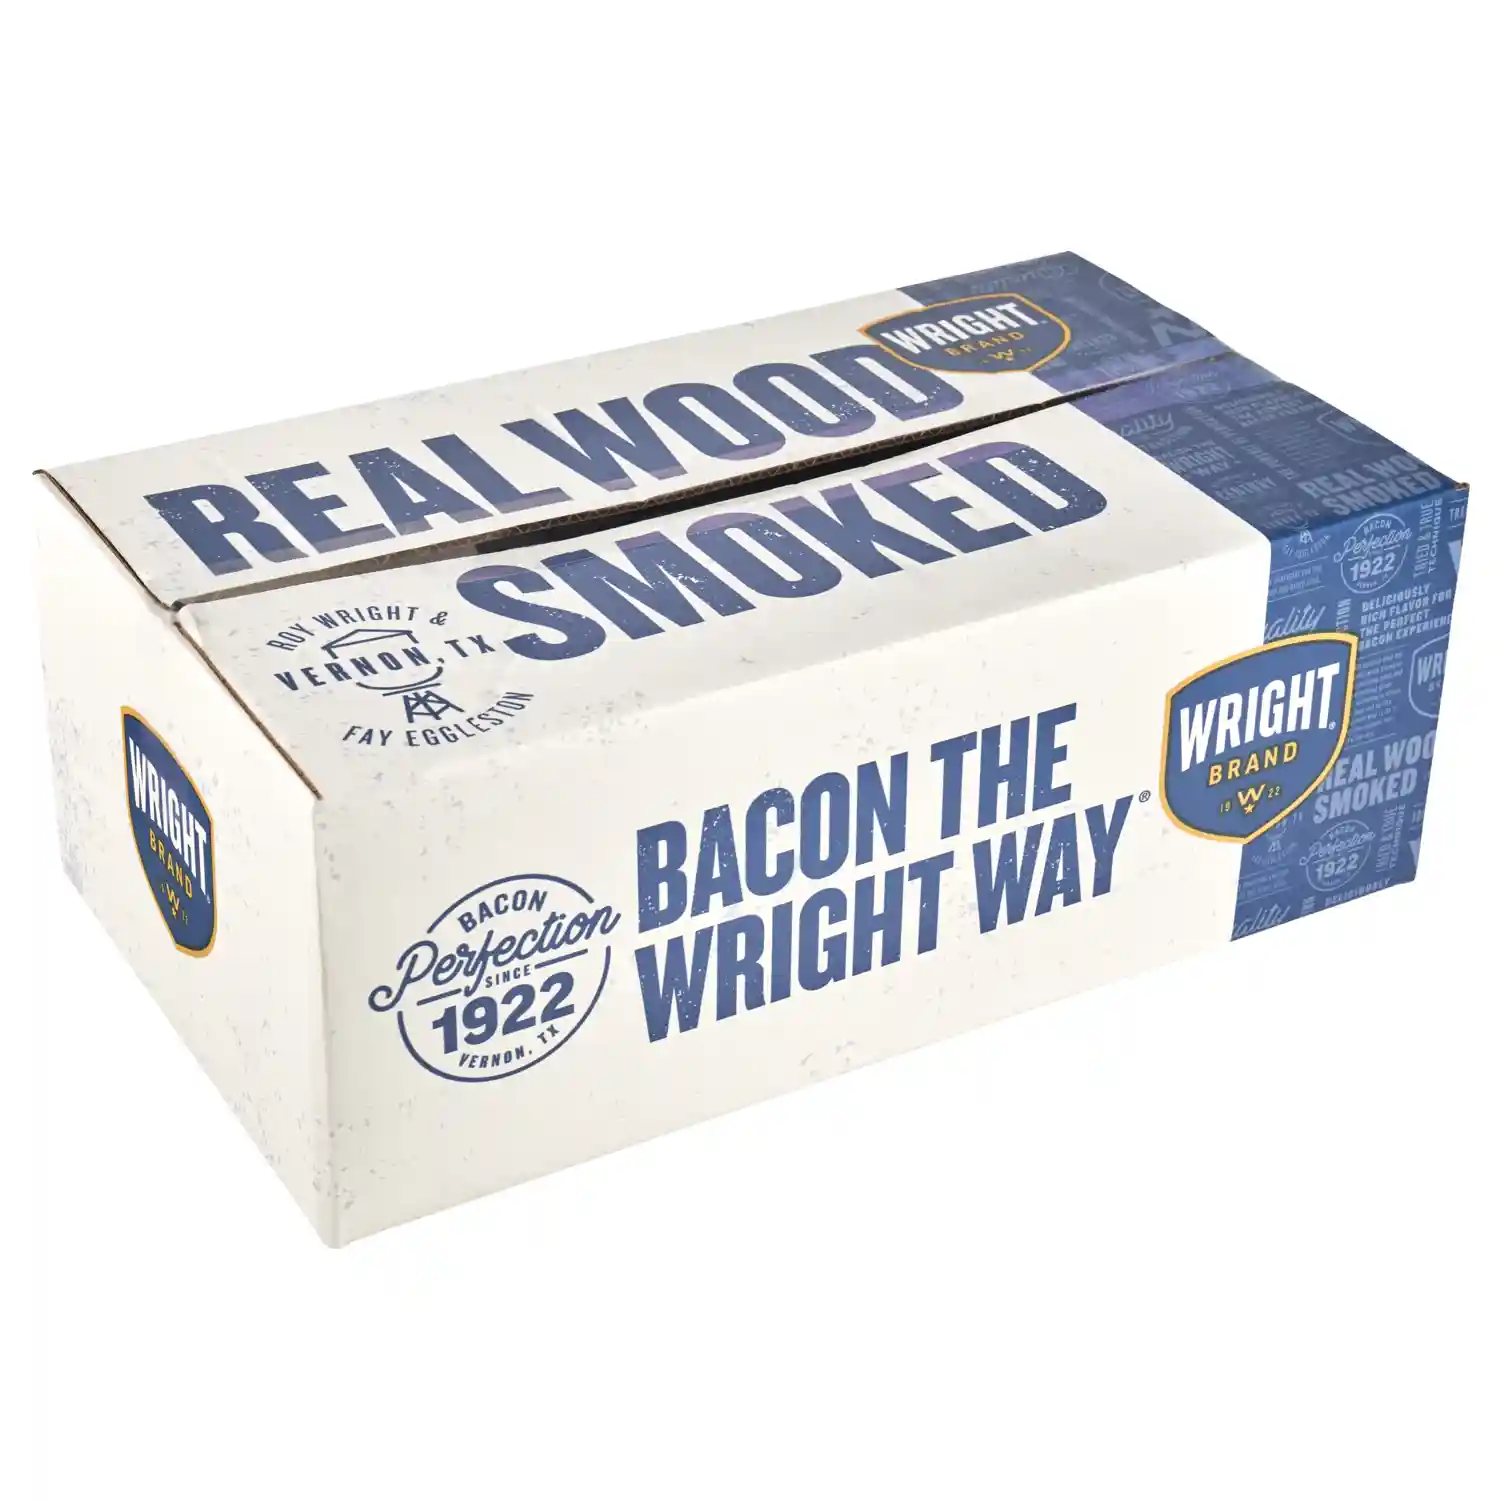 Wright® Brand Naturally Hickory Smoked Thin Sliced Bacon, Flat-Pack®, 15 Lbs, 18-22 Slices per Pound, Gas Flushed_image_51